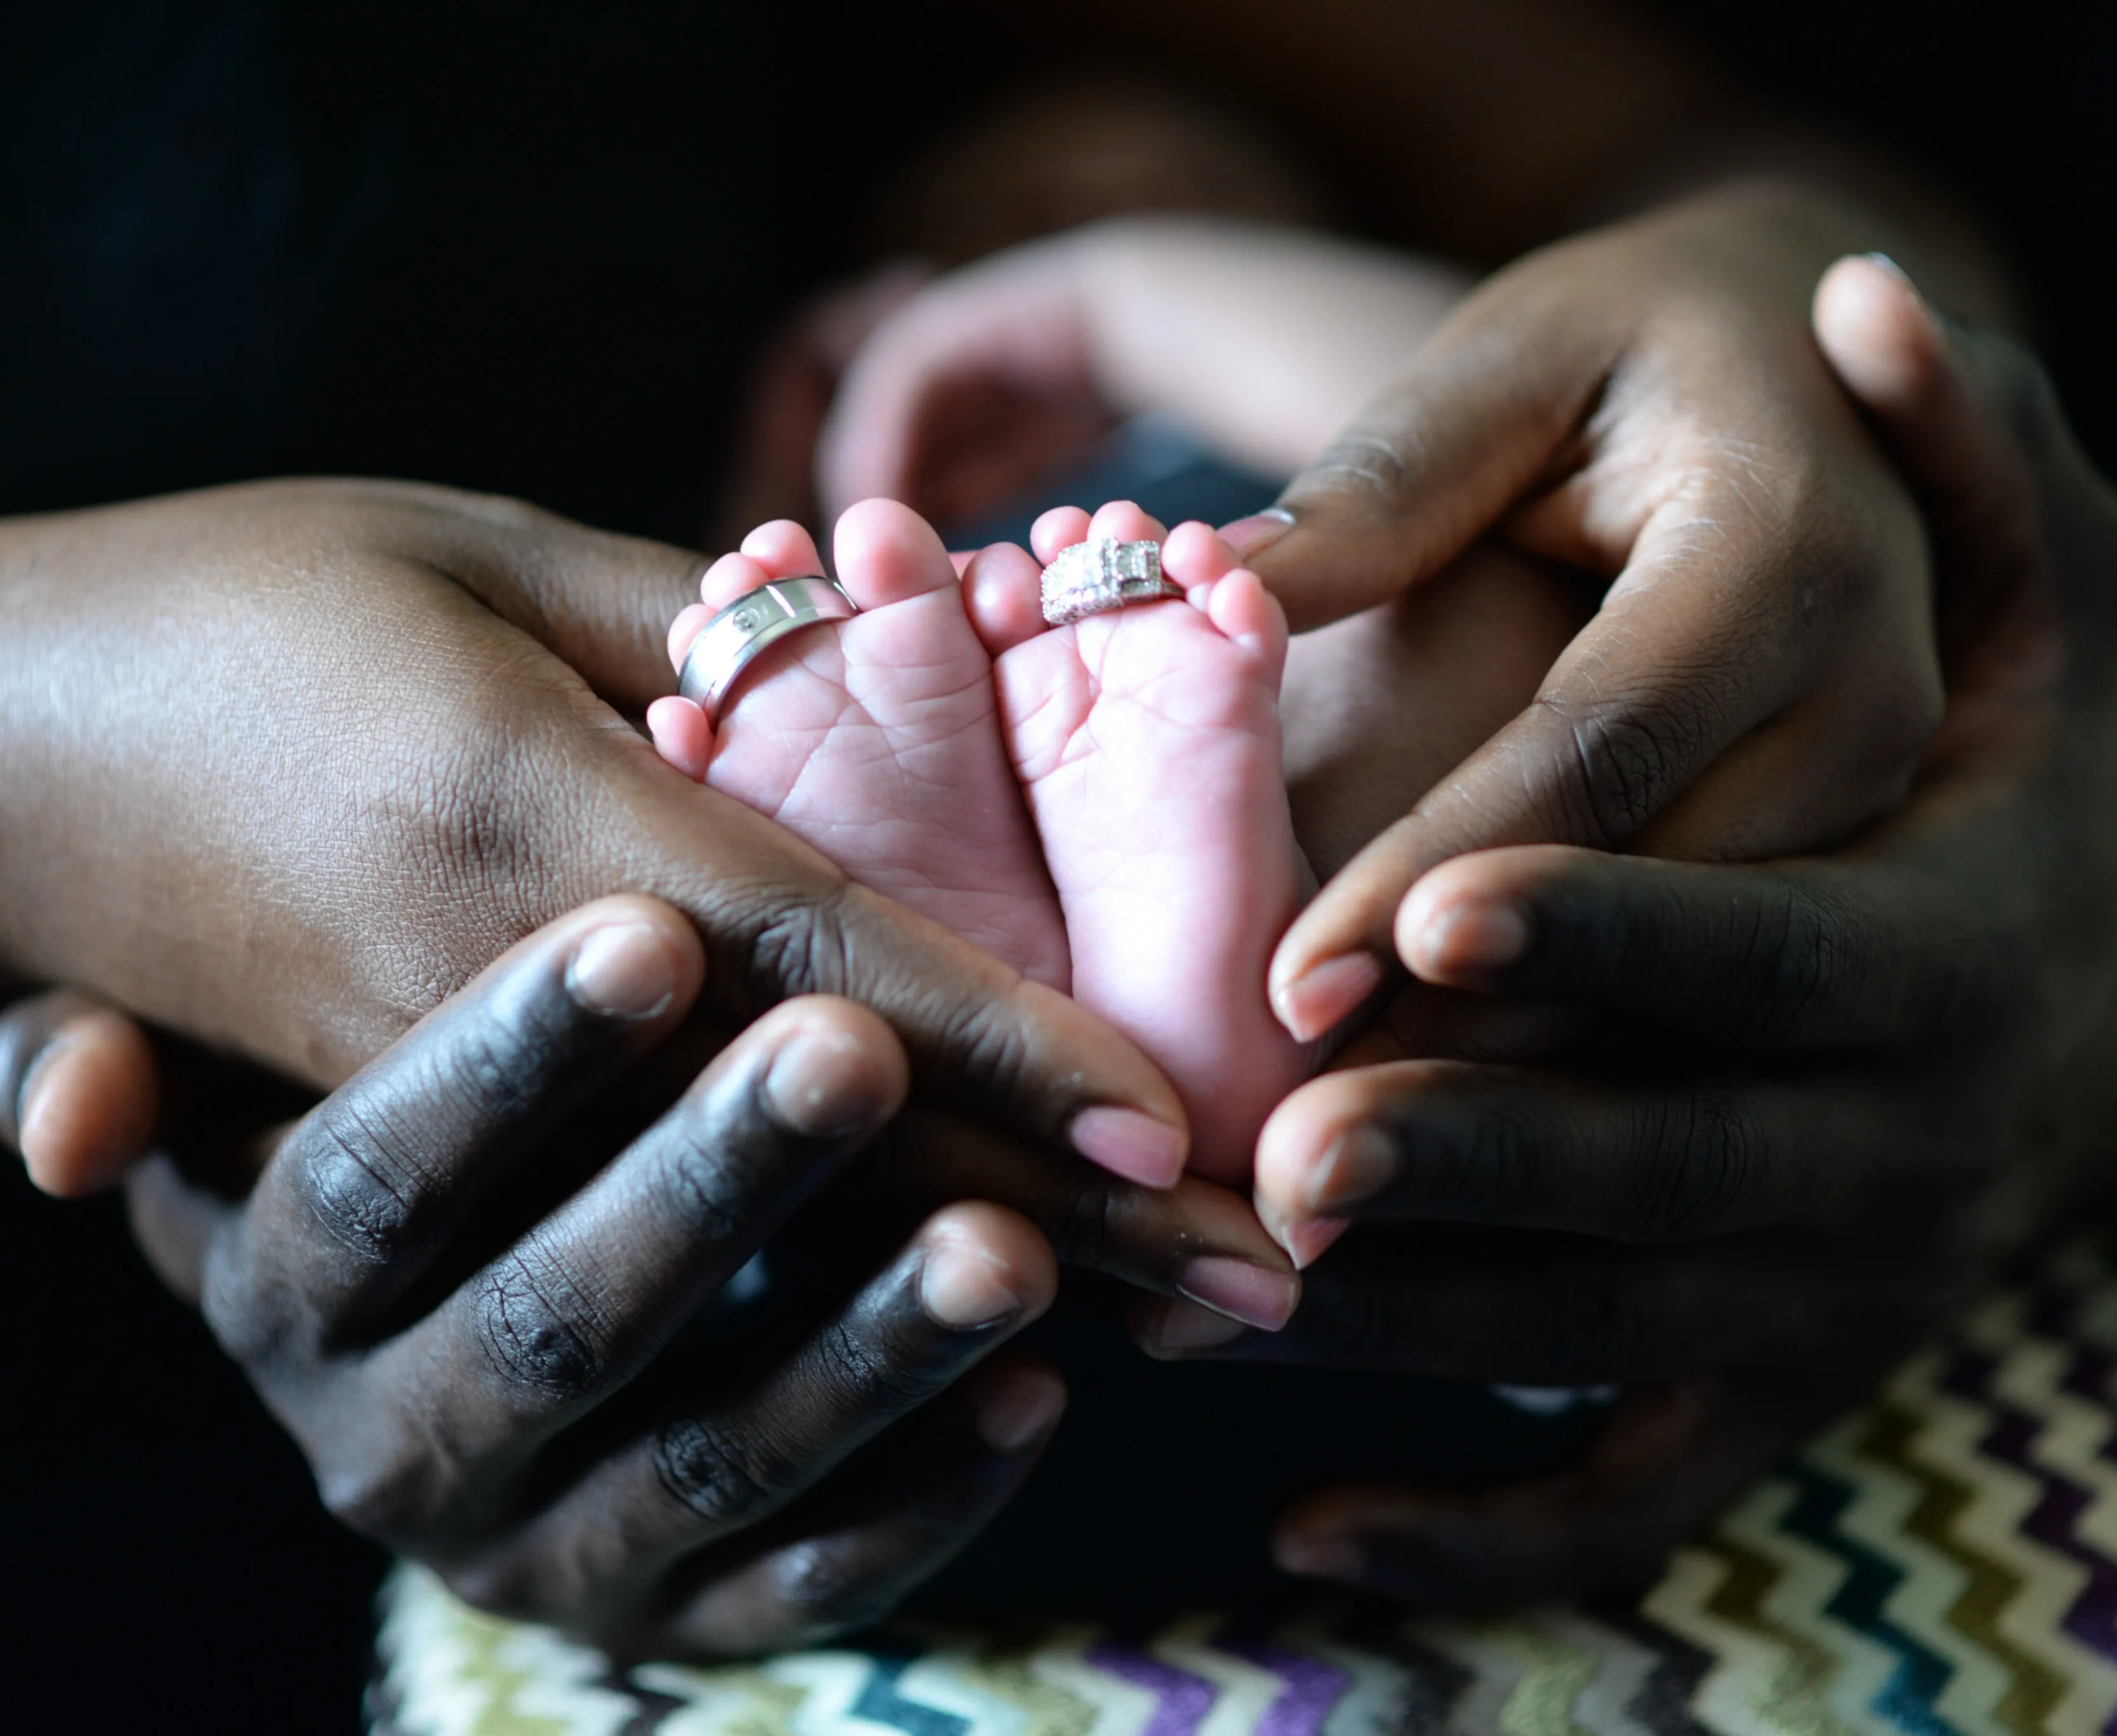 Close up image of parent's wedding rings on newborn's toes while newborn's feet are being held in parents' hands.